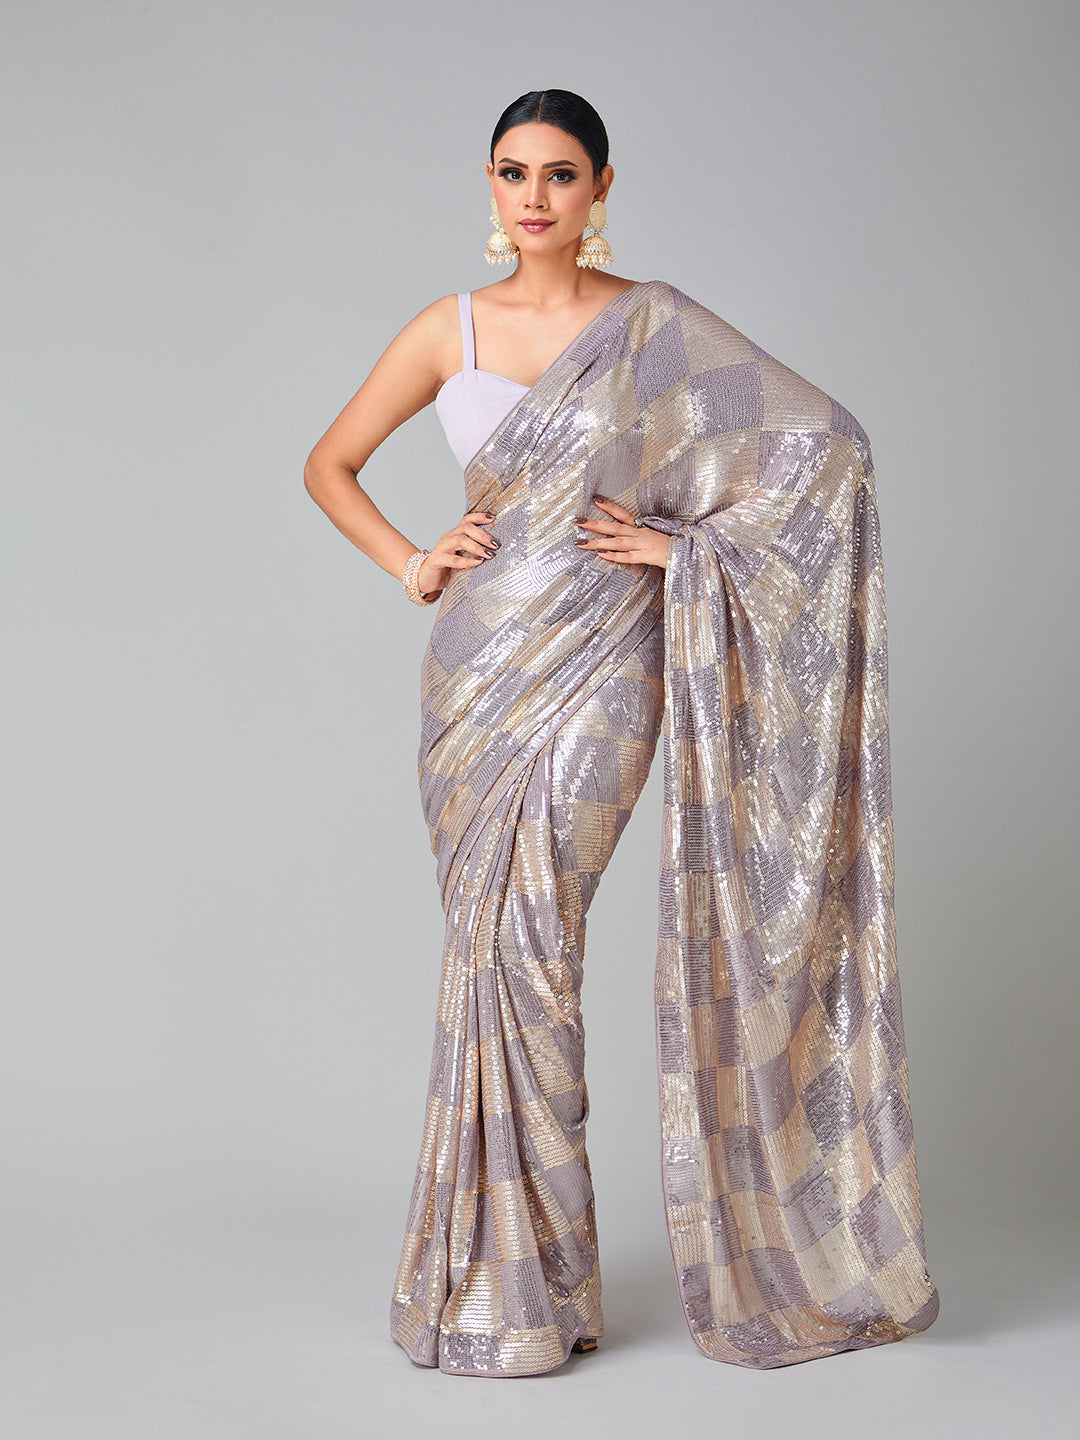 Beautifully Contrasted Gray & Gold Sequin Saree